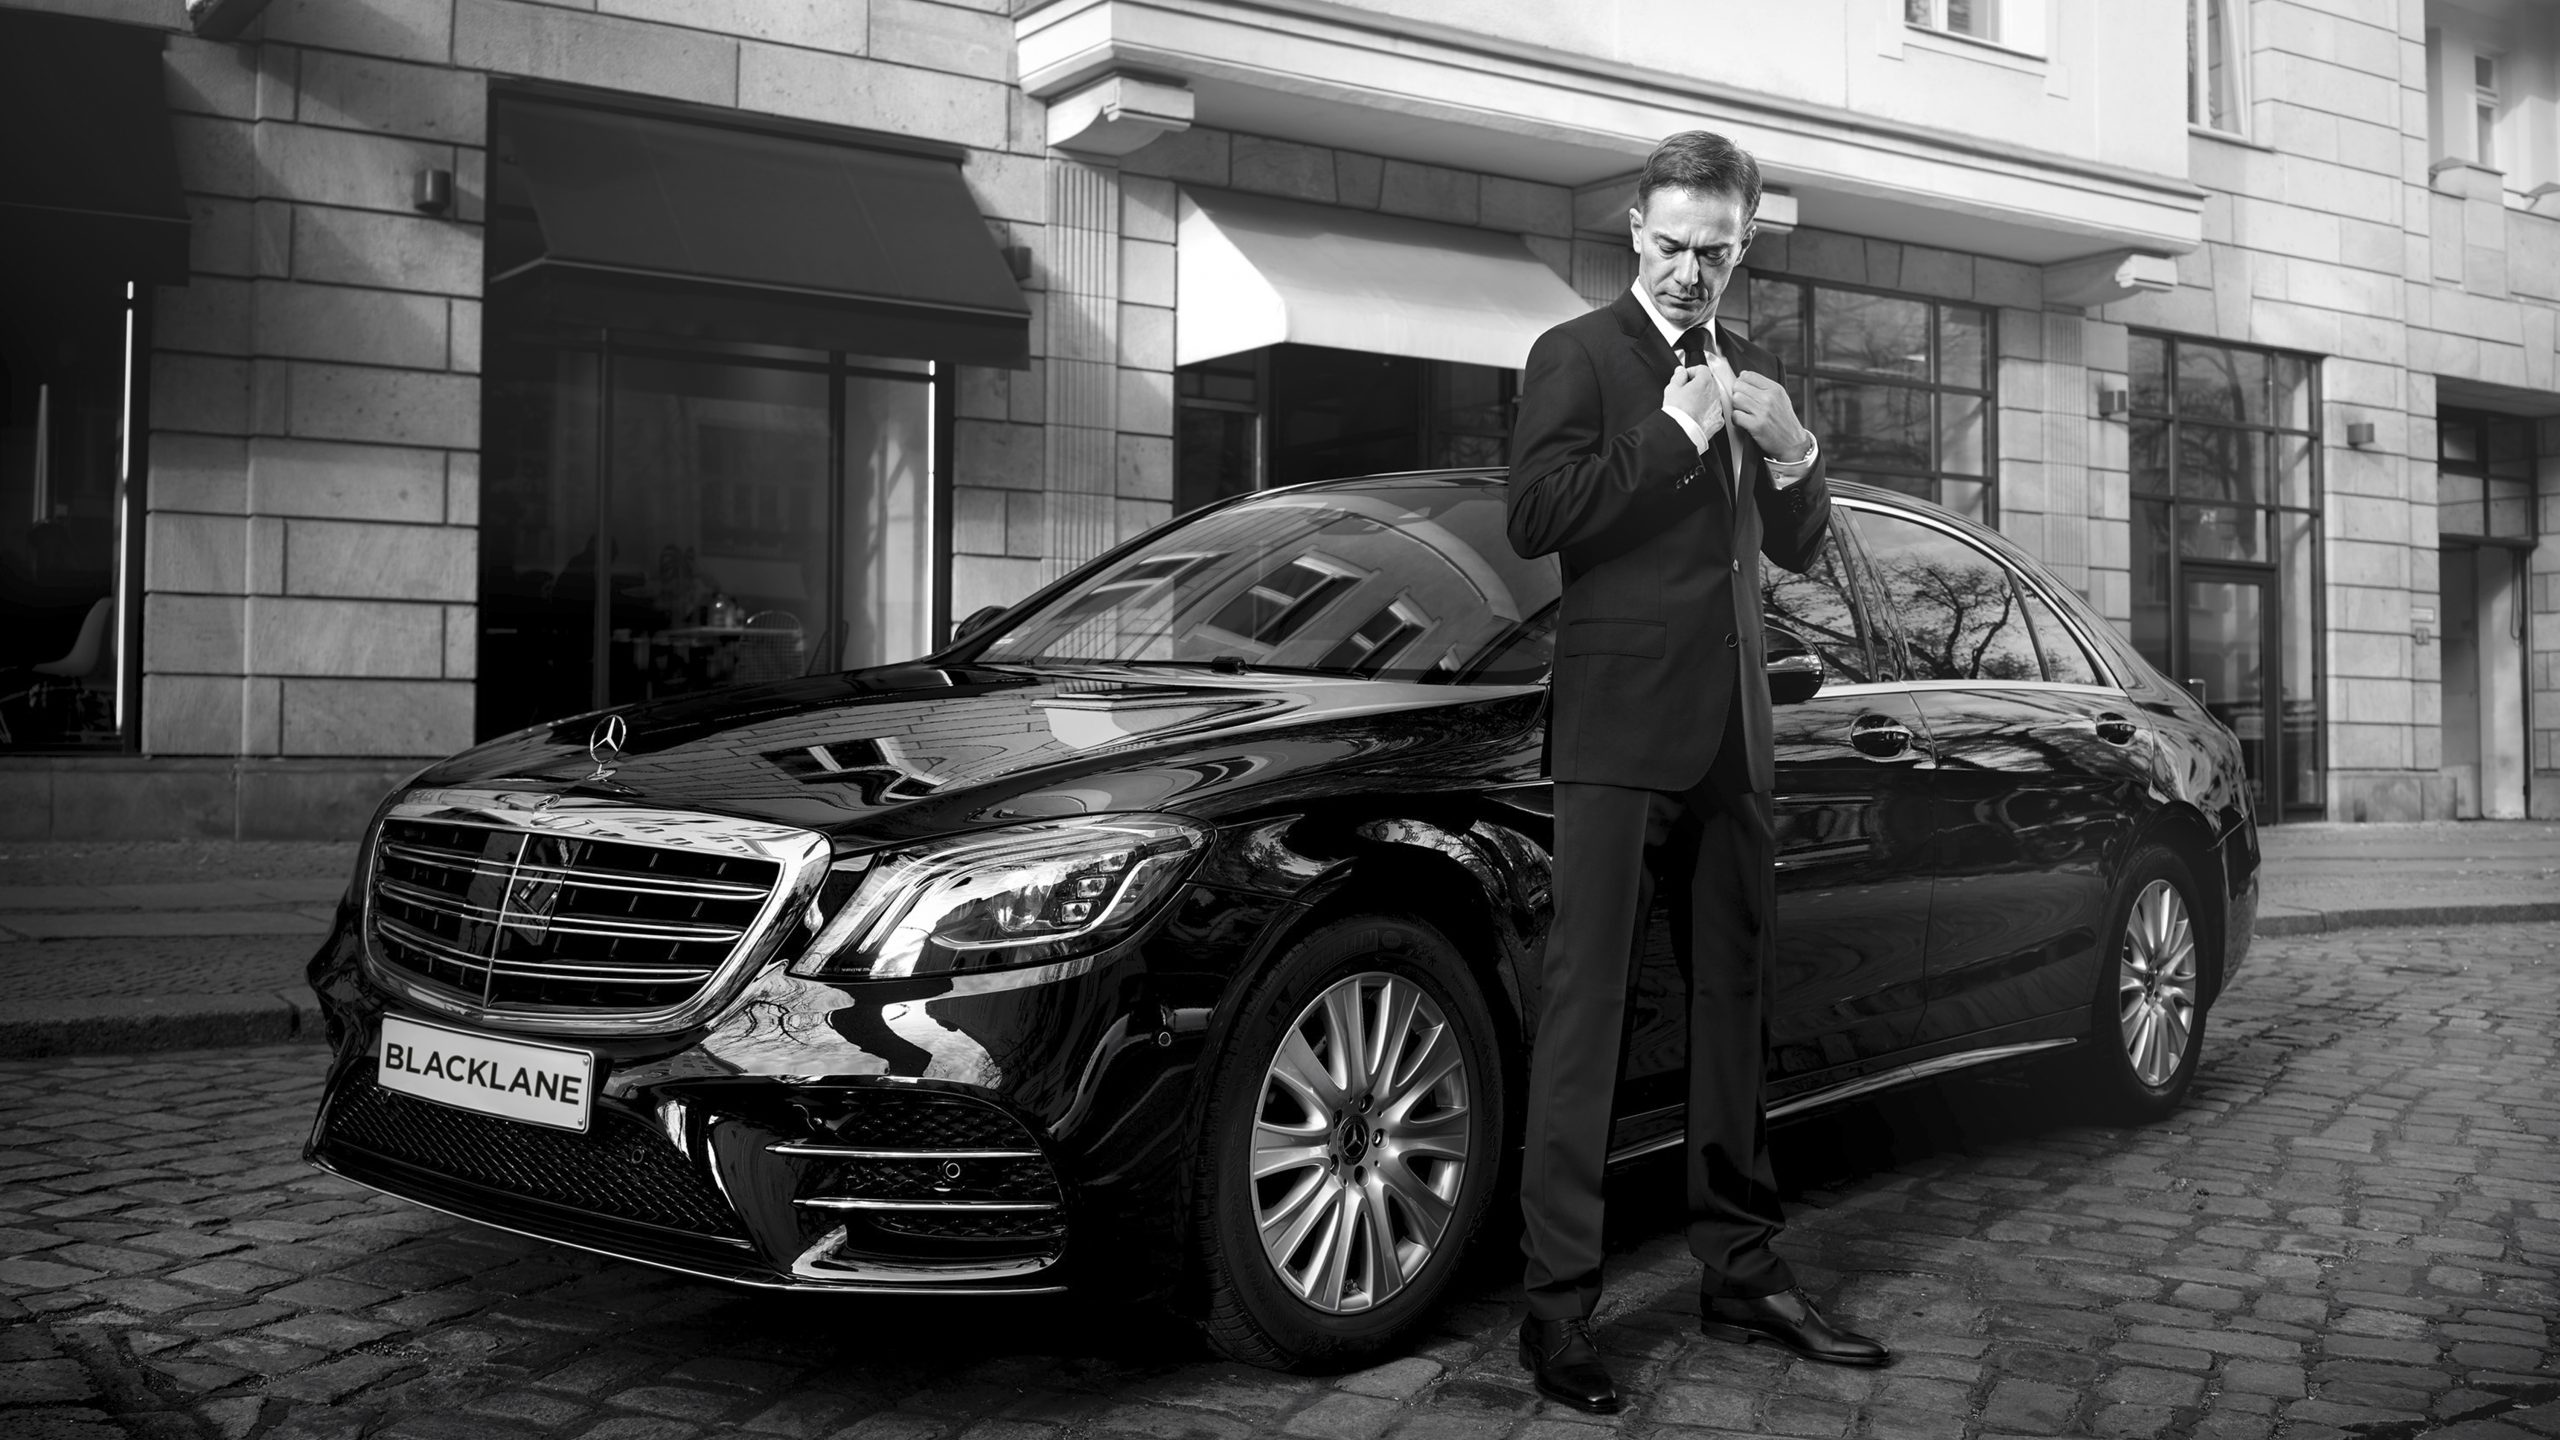 What is Blacklane Car Service